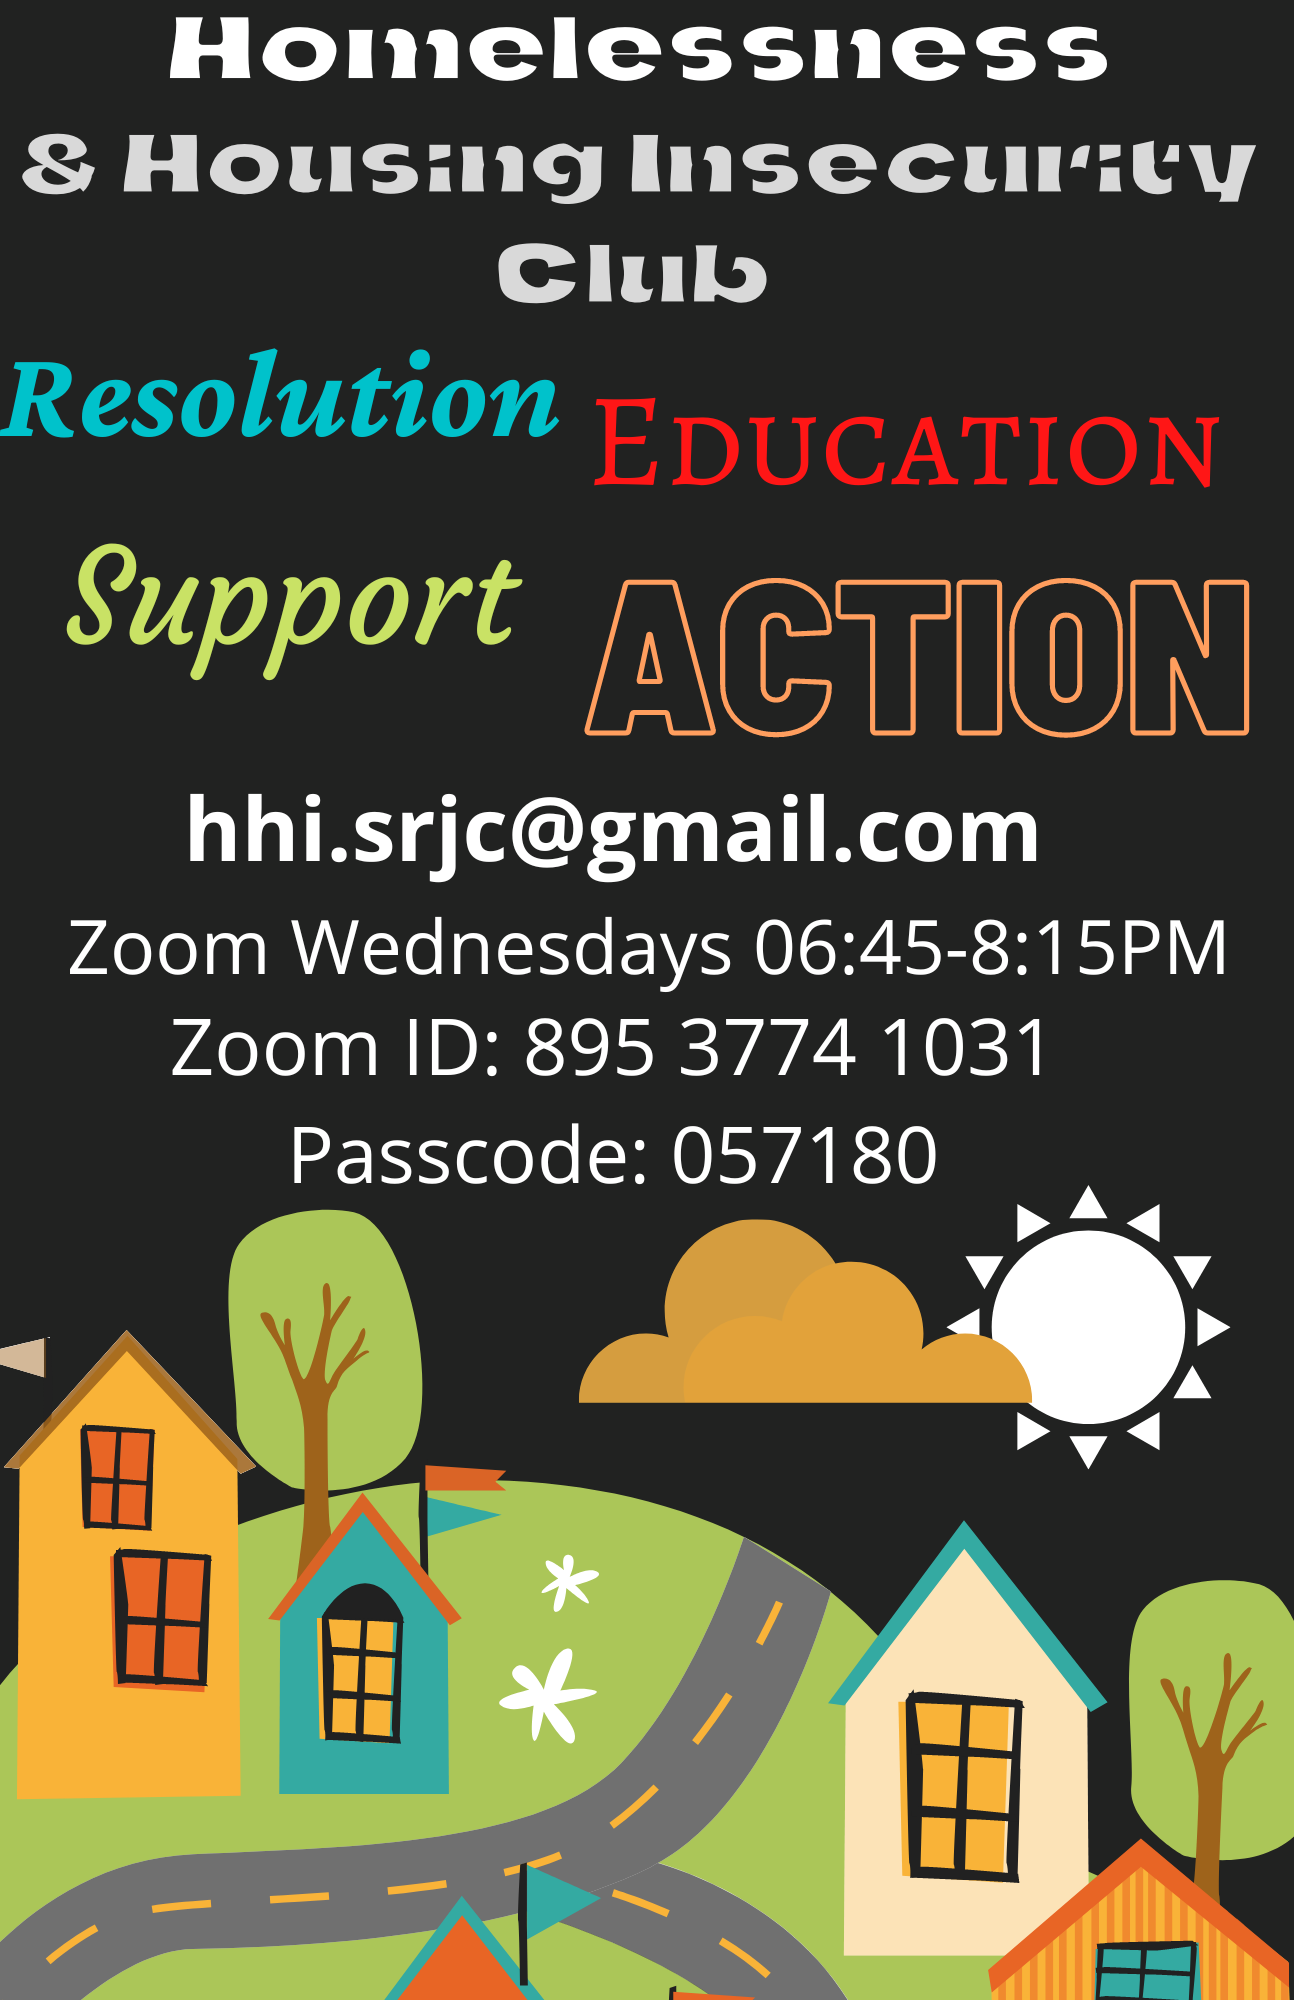 Homelessness & Housing Insecurity Club Meetings are Wednesdays from 6:45 PM to 8:15 PM on zoom, ID 89537741031 with the passcode 057180